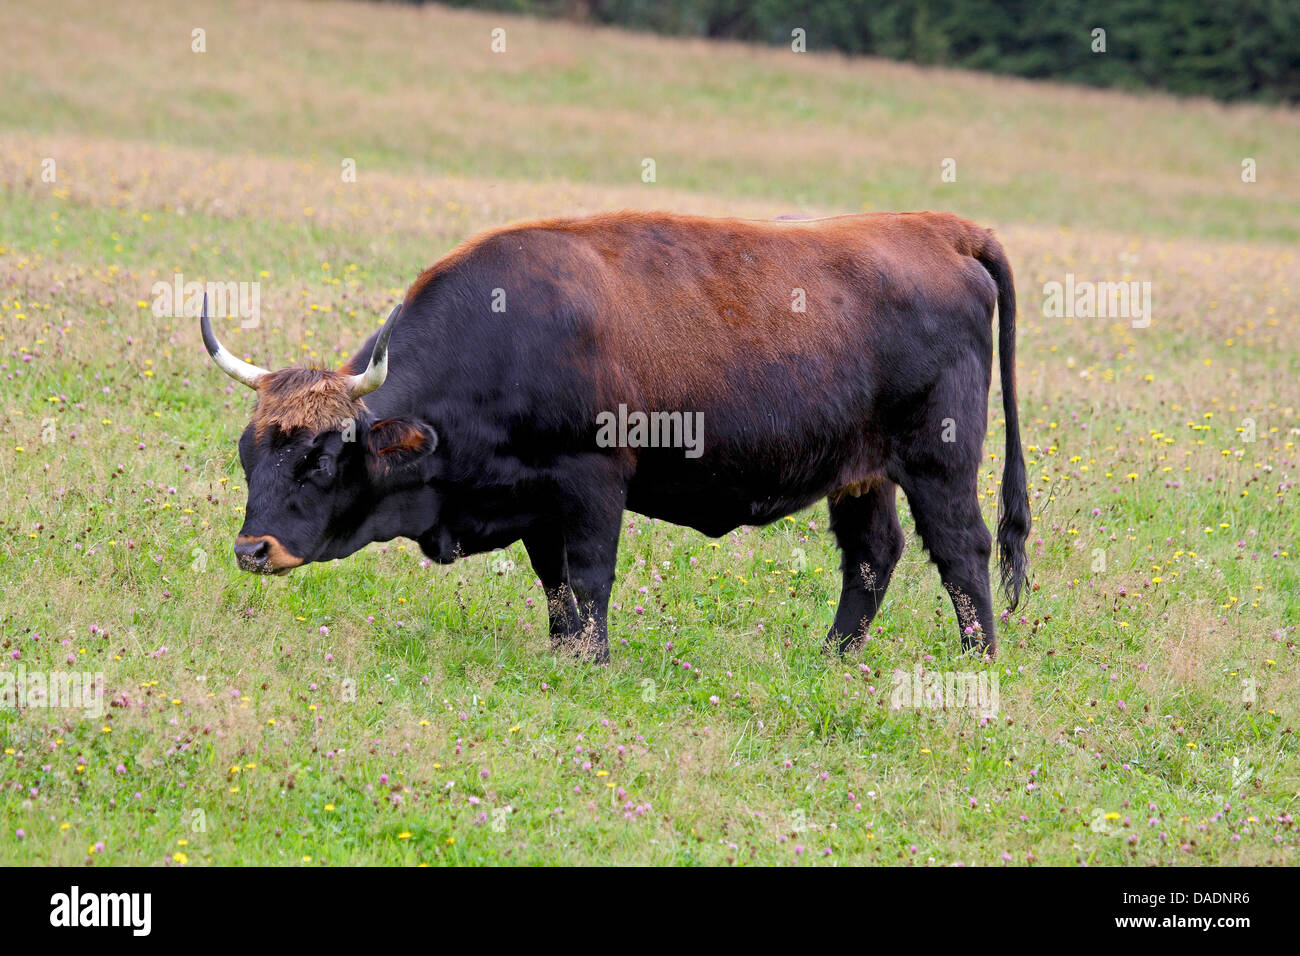 aurochs (domestic cattle) (Bos taurus, Bos primigenius), standing on pasture, Germany Stock Photo